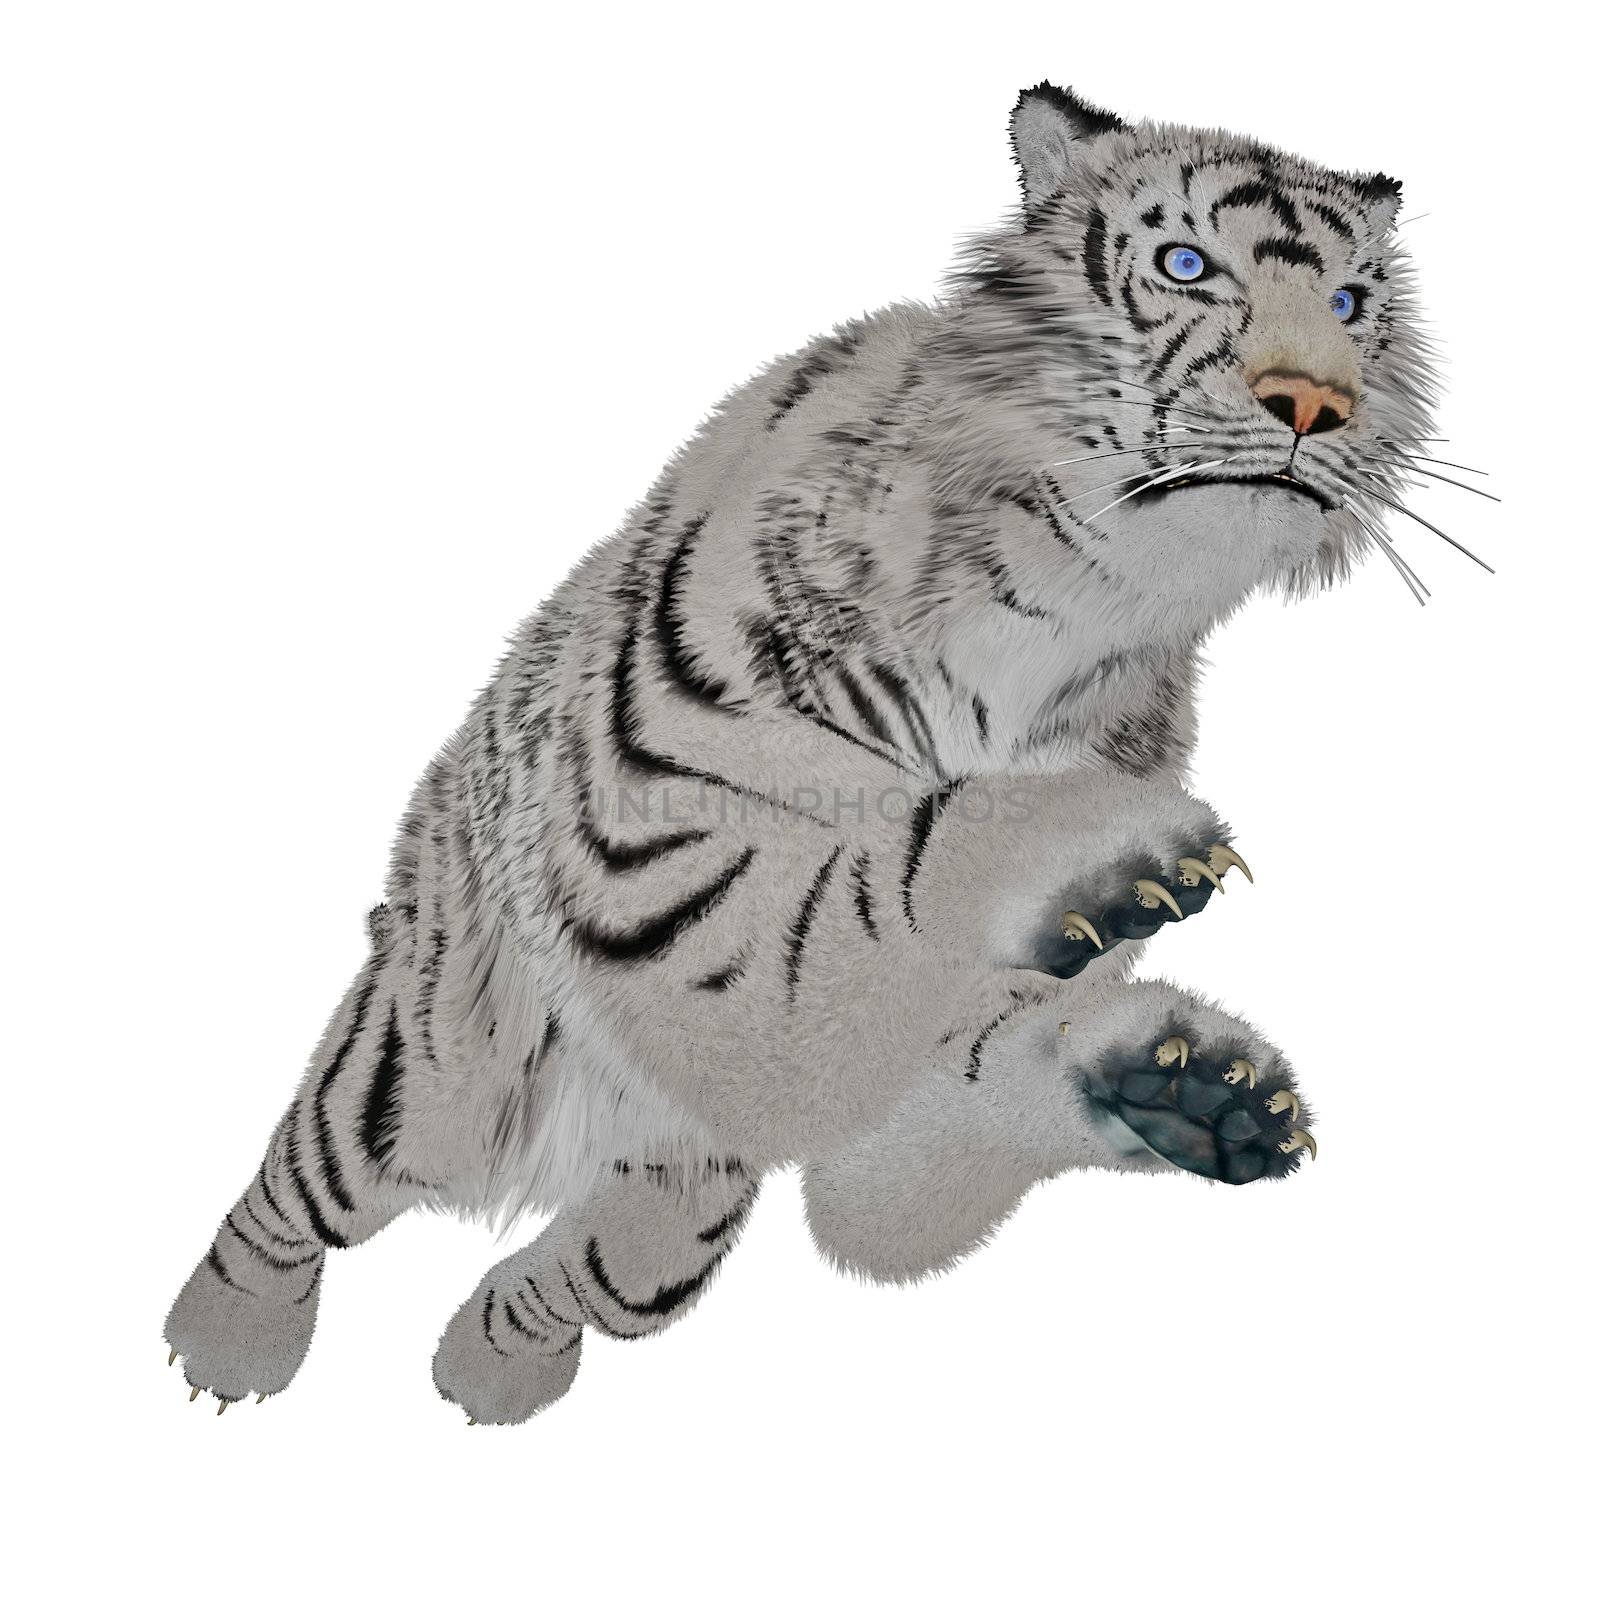 White tiger jumping in white background